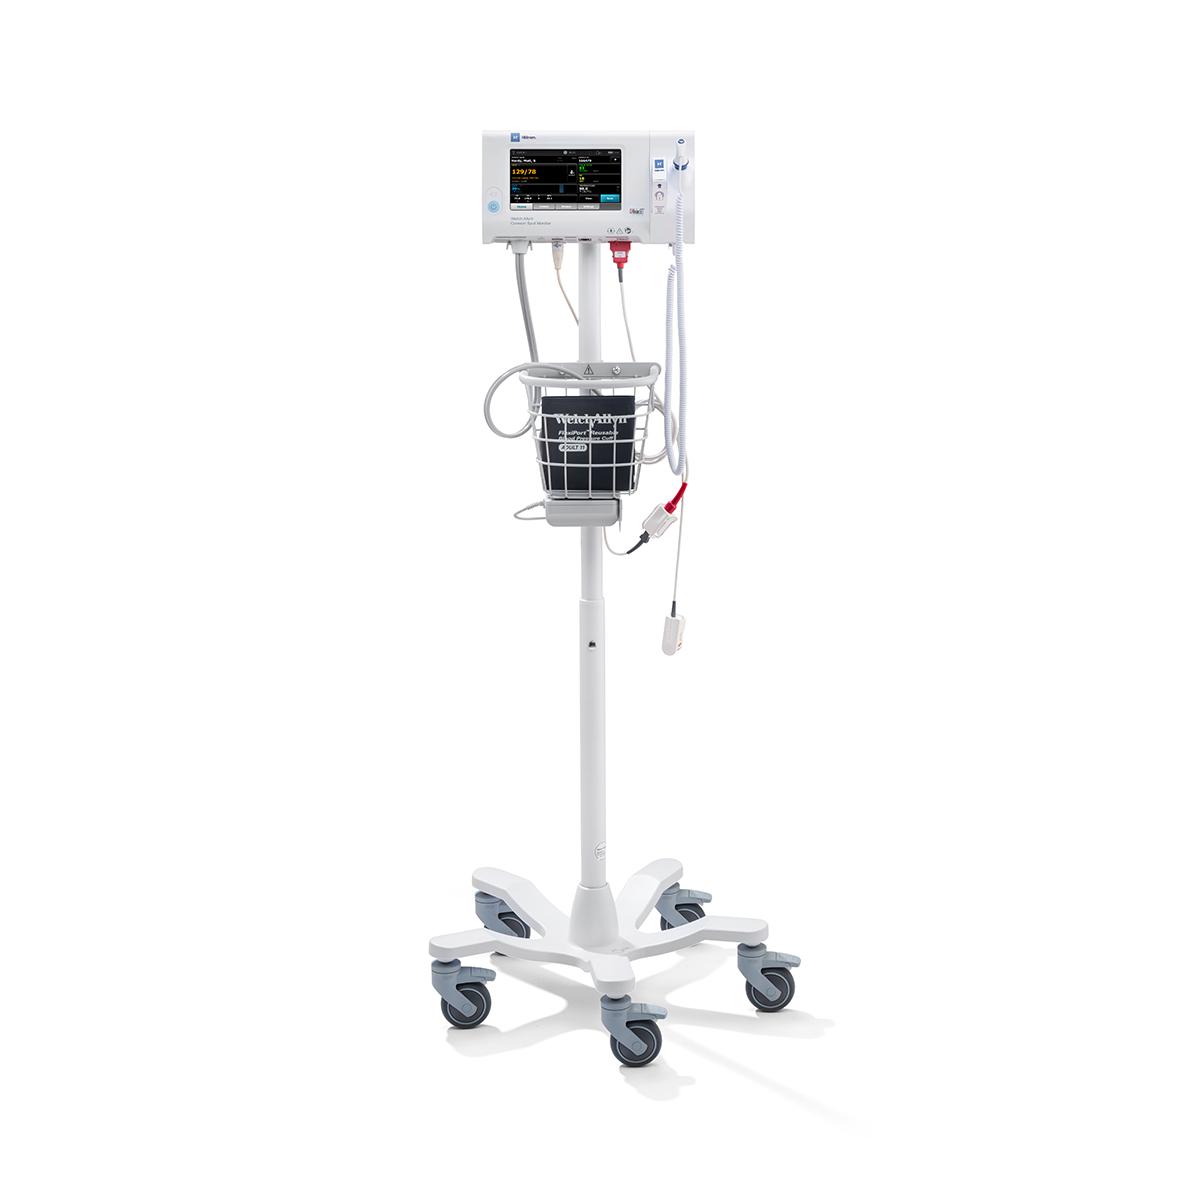 Welch Allyn Connex 7300 Bluetooth Connectivity Spot Monitor with Nellcor SpO2 and SureTemp Plus